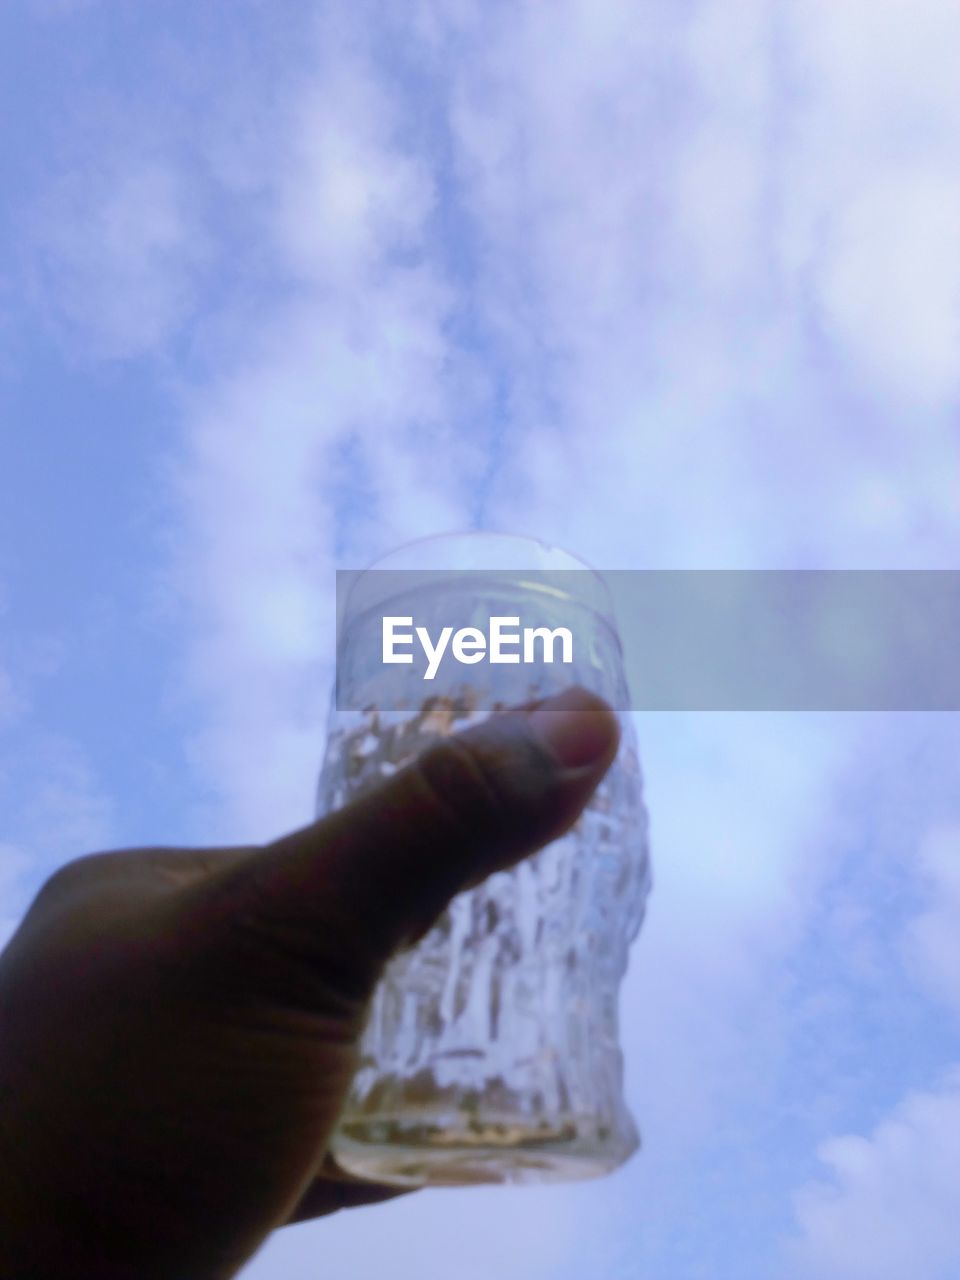 CROPPED IMAGE OF HAND HOLDING GLASS AGAINST SKY